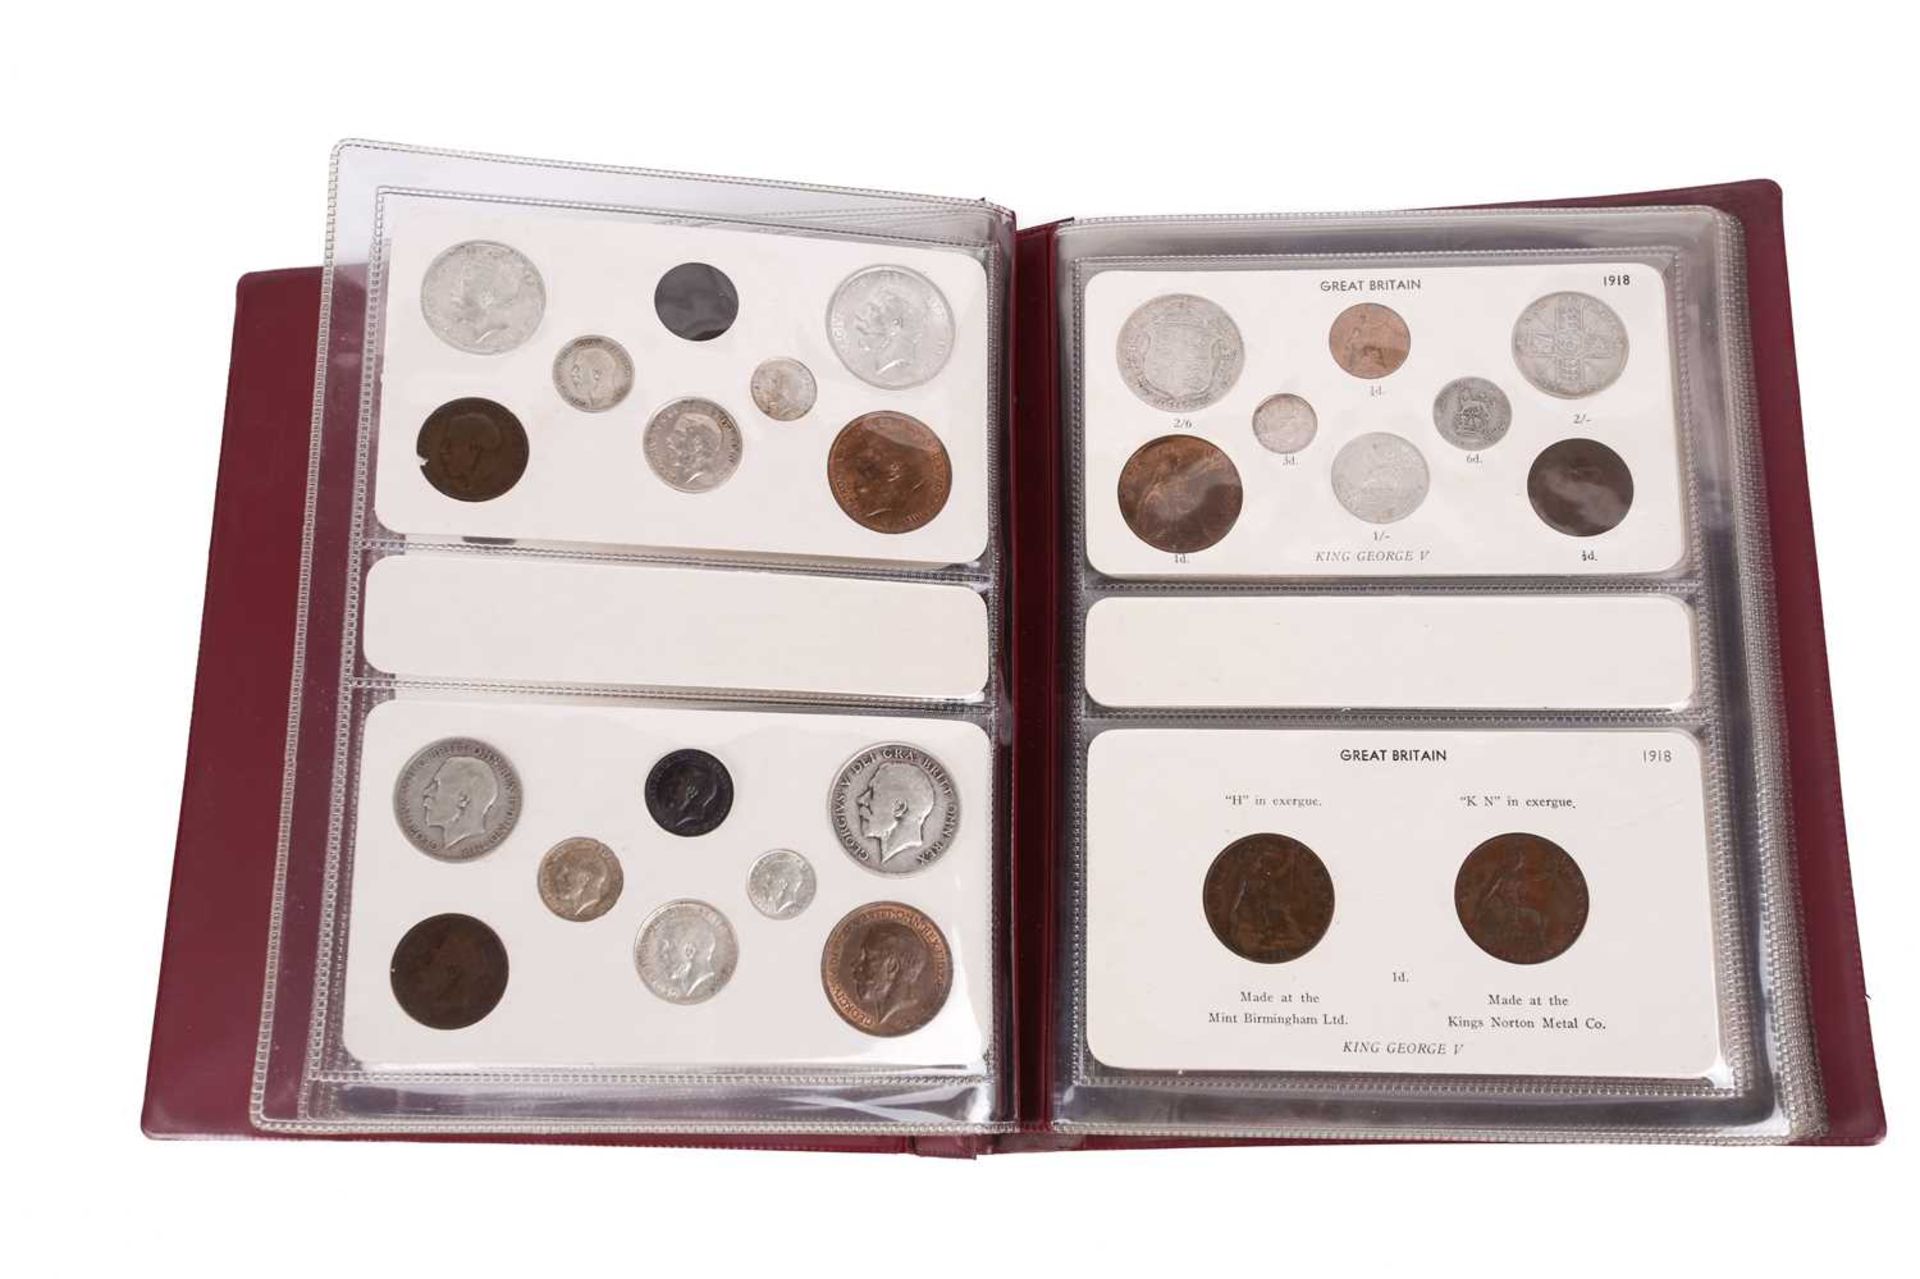 Great Britain - an album containing sixteen full sets of George V coins, half crown to farthing - Image 13 of 15